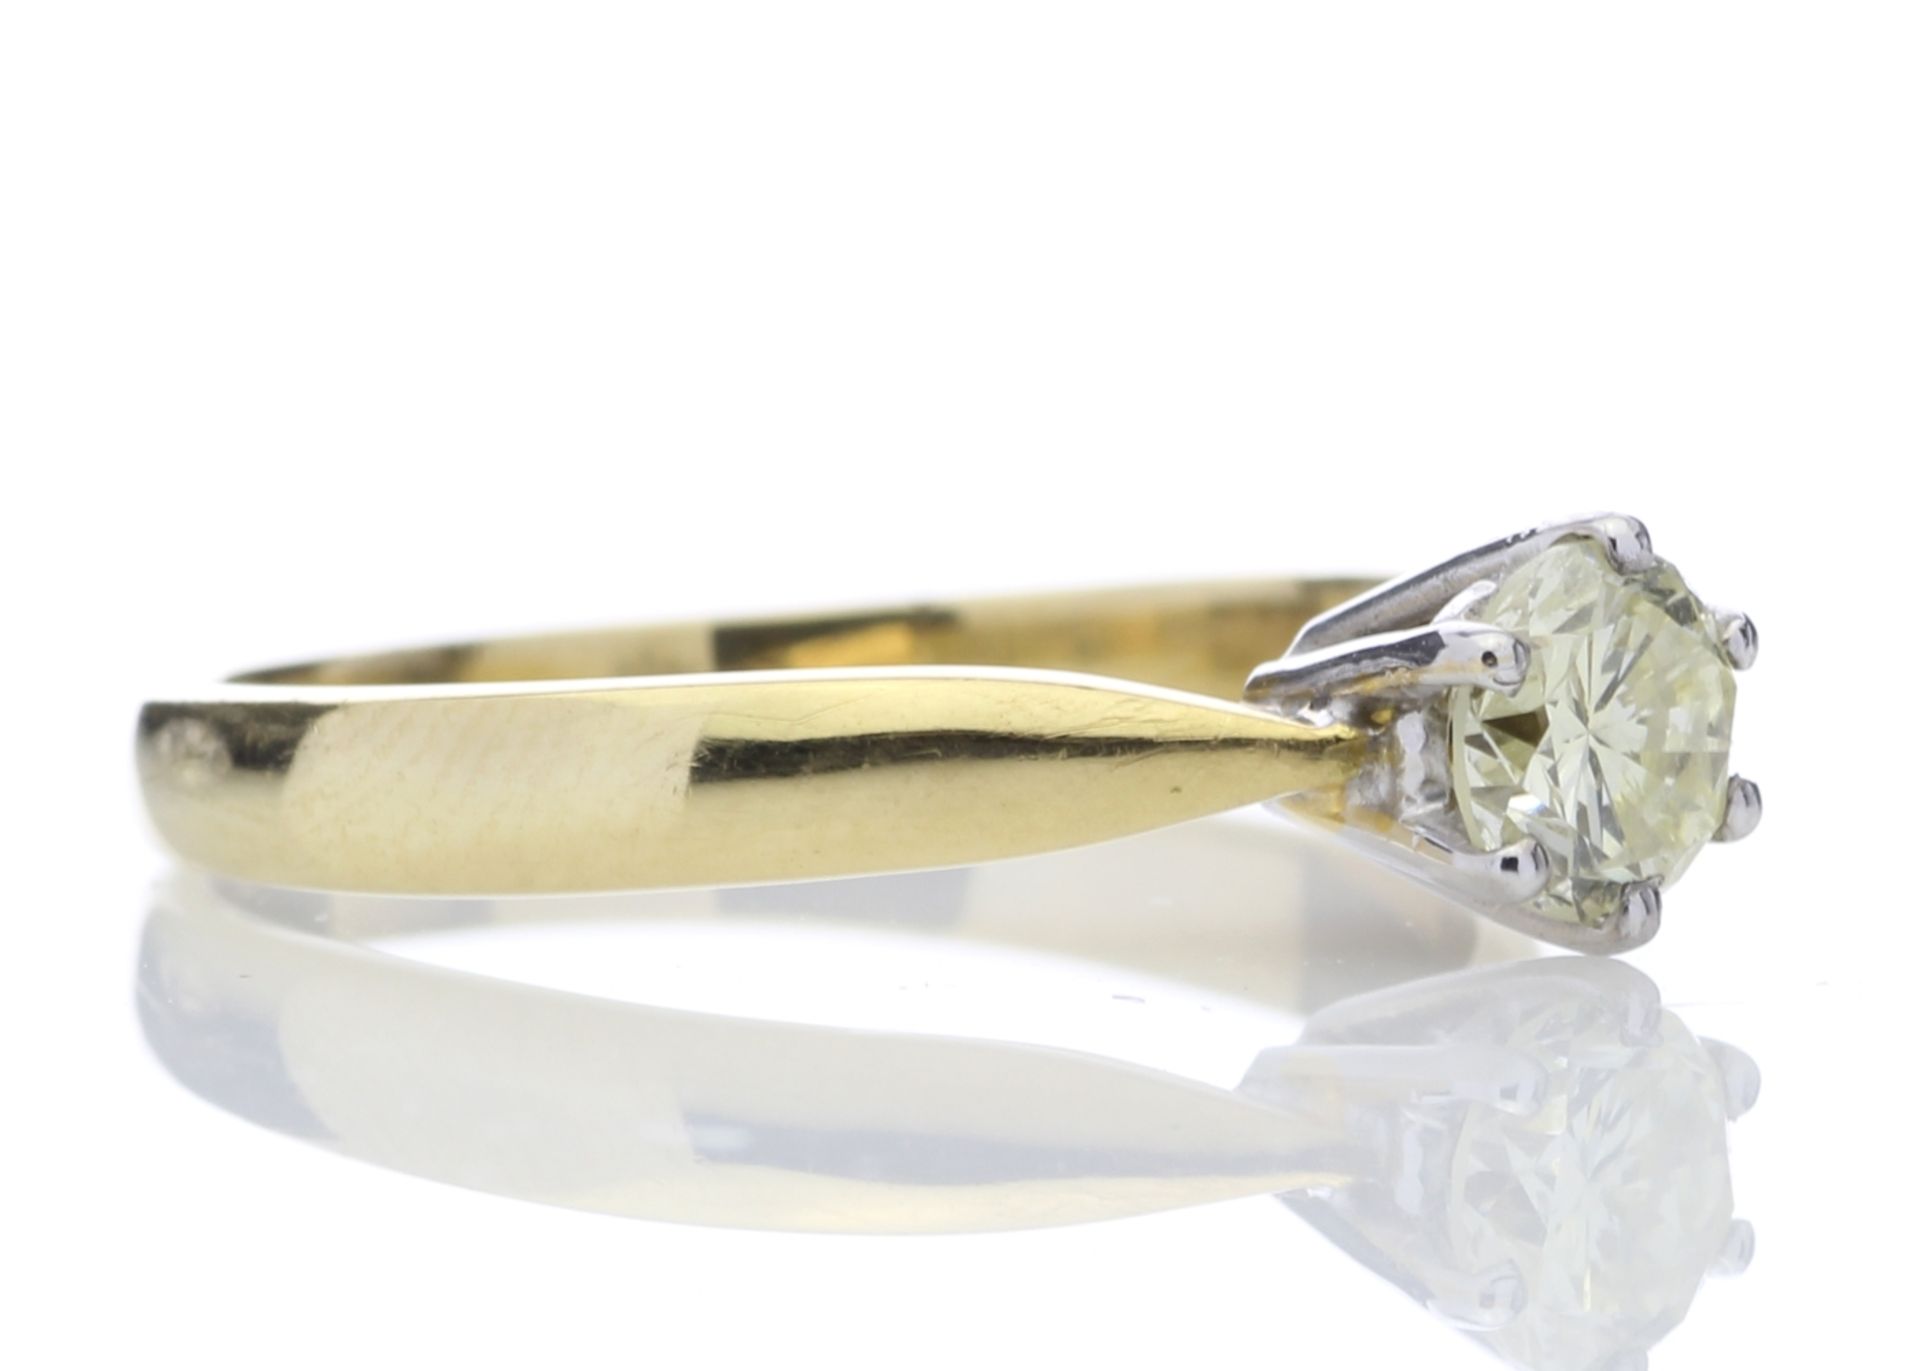 18ct Single Stone Fancy Yellow Diamond Ring 0.56 Carats - Valued By AGI £6,120.00 - A gorgeous - Image 4 of 5